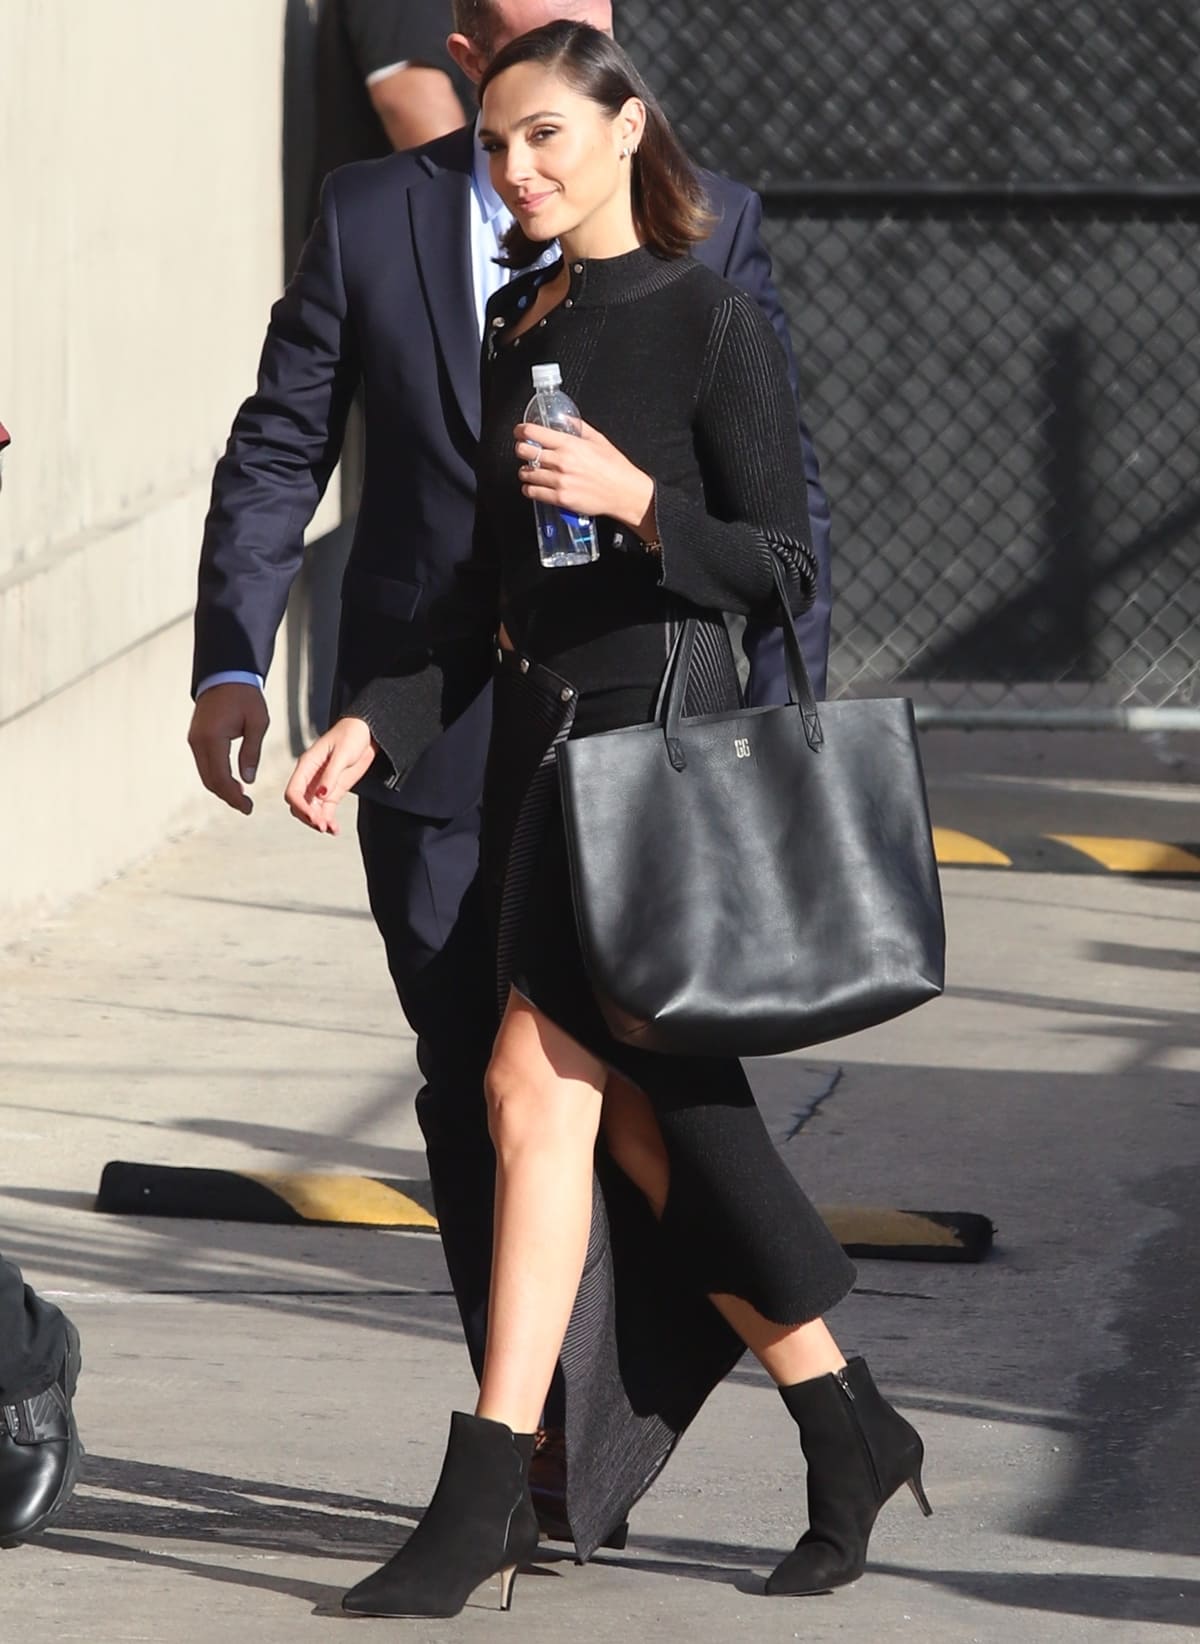 Gal Gadot wears Sarah Flint Perfect dress booties and carries a black Madewell Transport Tote